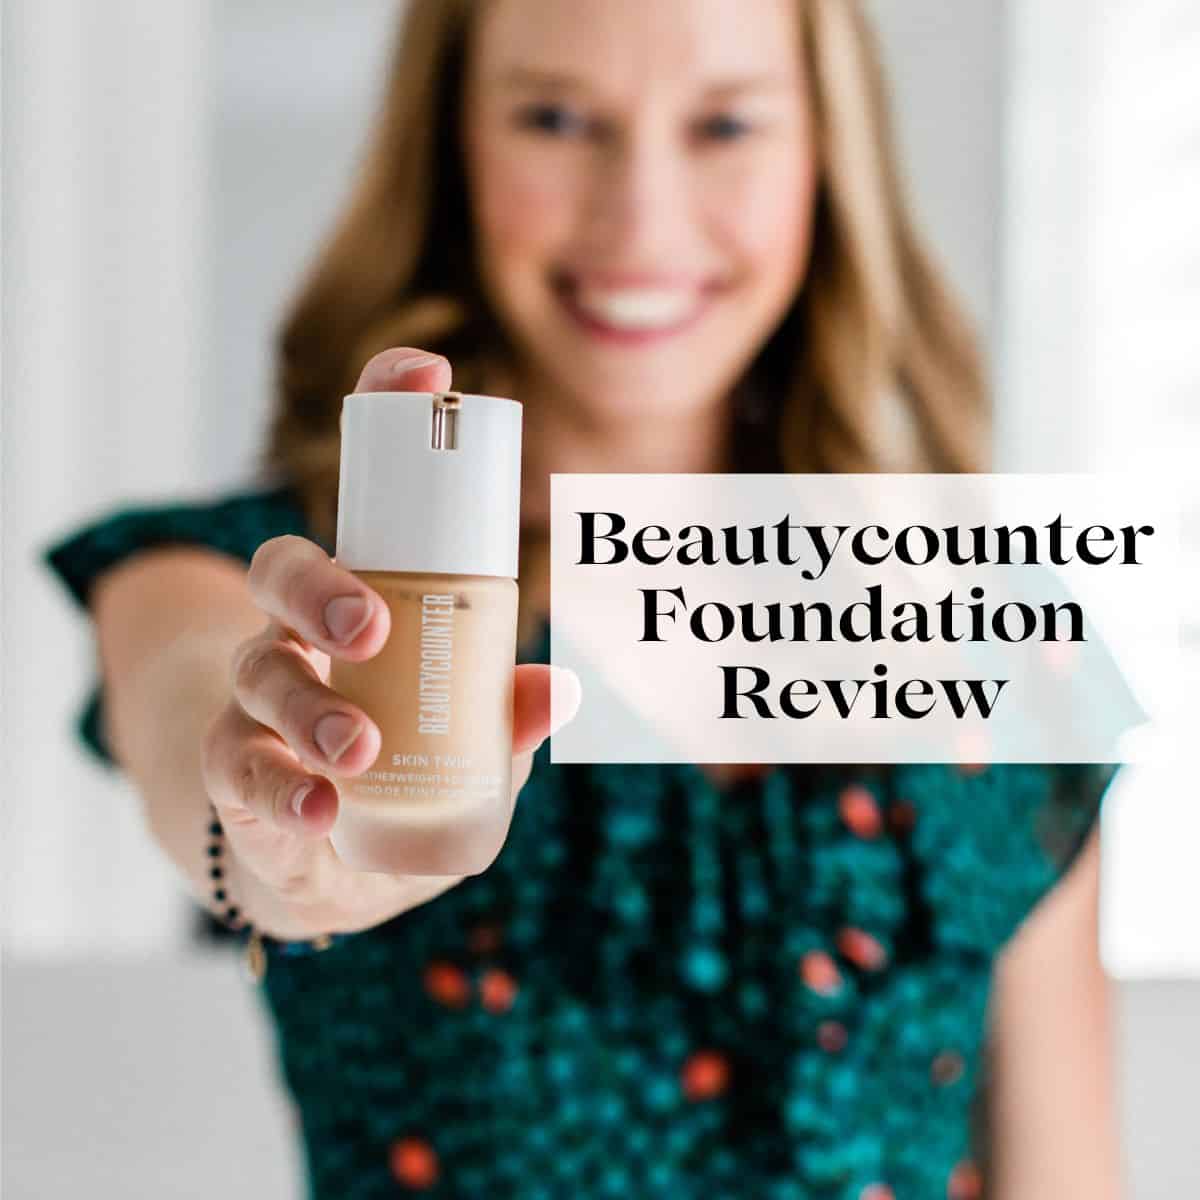 Erin Carter holding a bottle of Beautycounter foundation with the title "Beautycounter Foundation Review" over her.